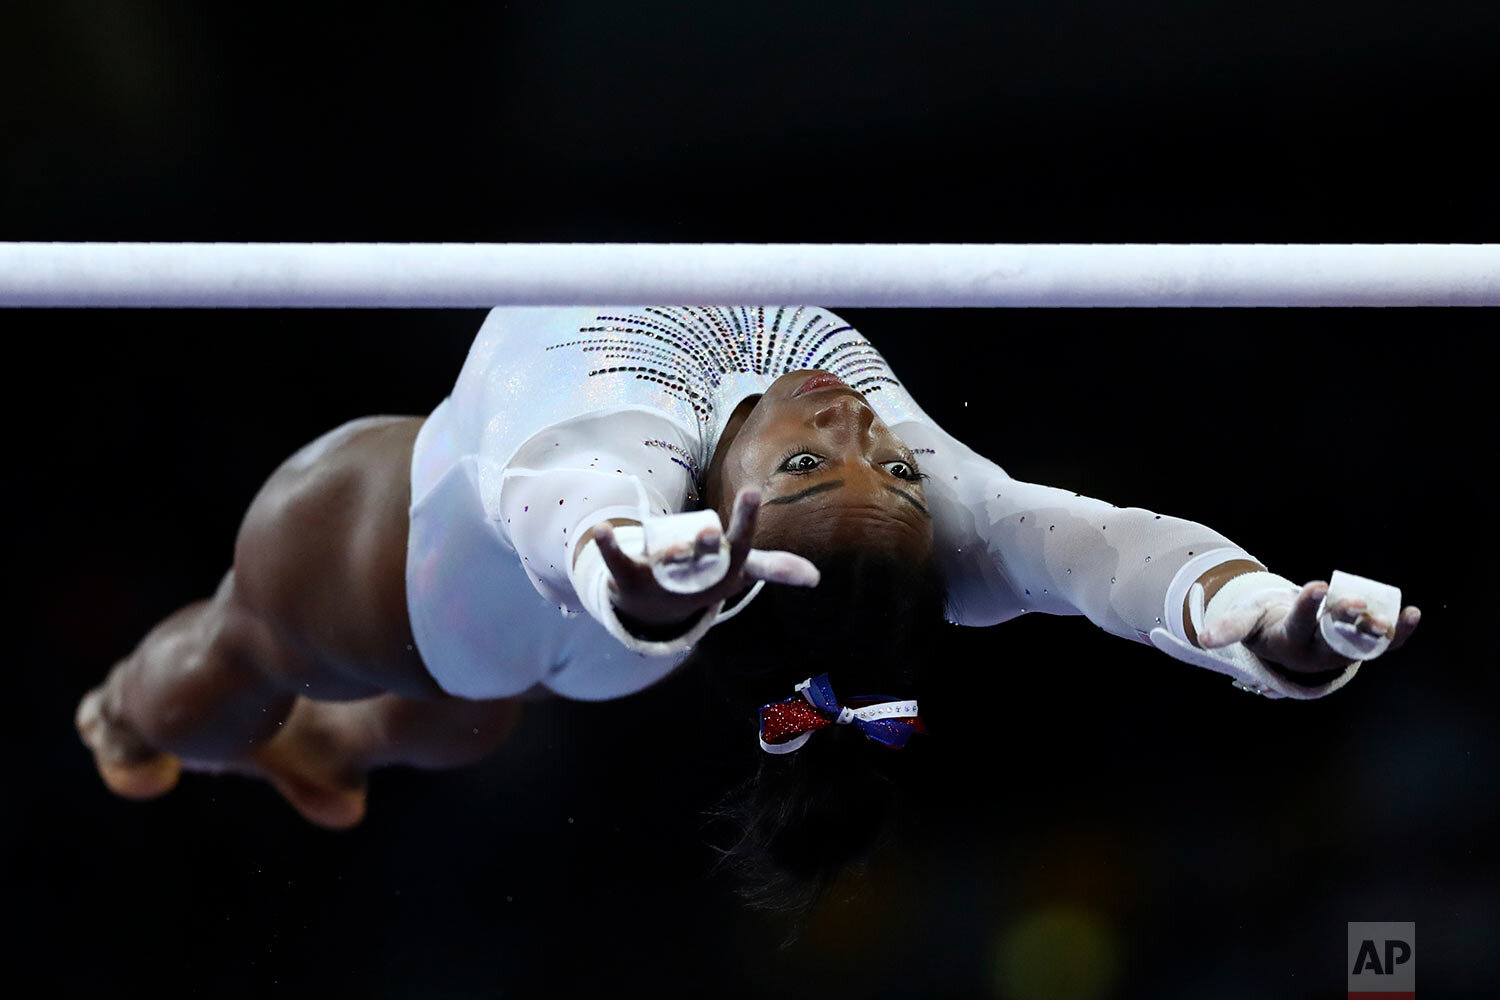  Simone Biles of the United States performs on the uneven bars during a warmup for the women's all-around final at the Gymnastics World Championships in Stuttgart, Germany, on Oct. 10, 2019. (AP Photo/Matthias Schrader) 